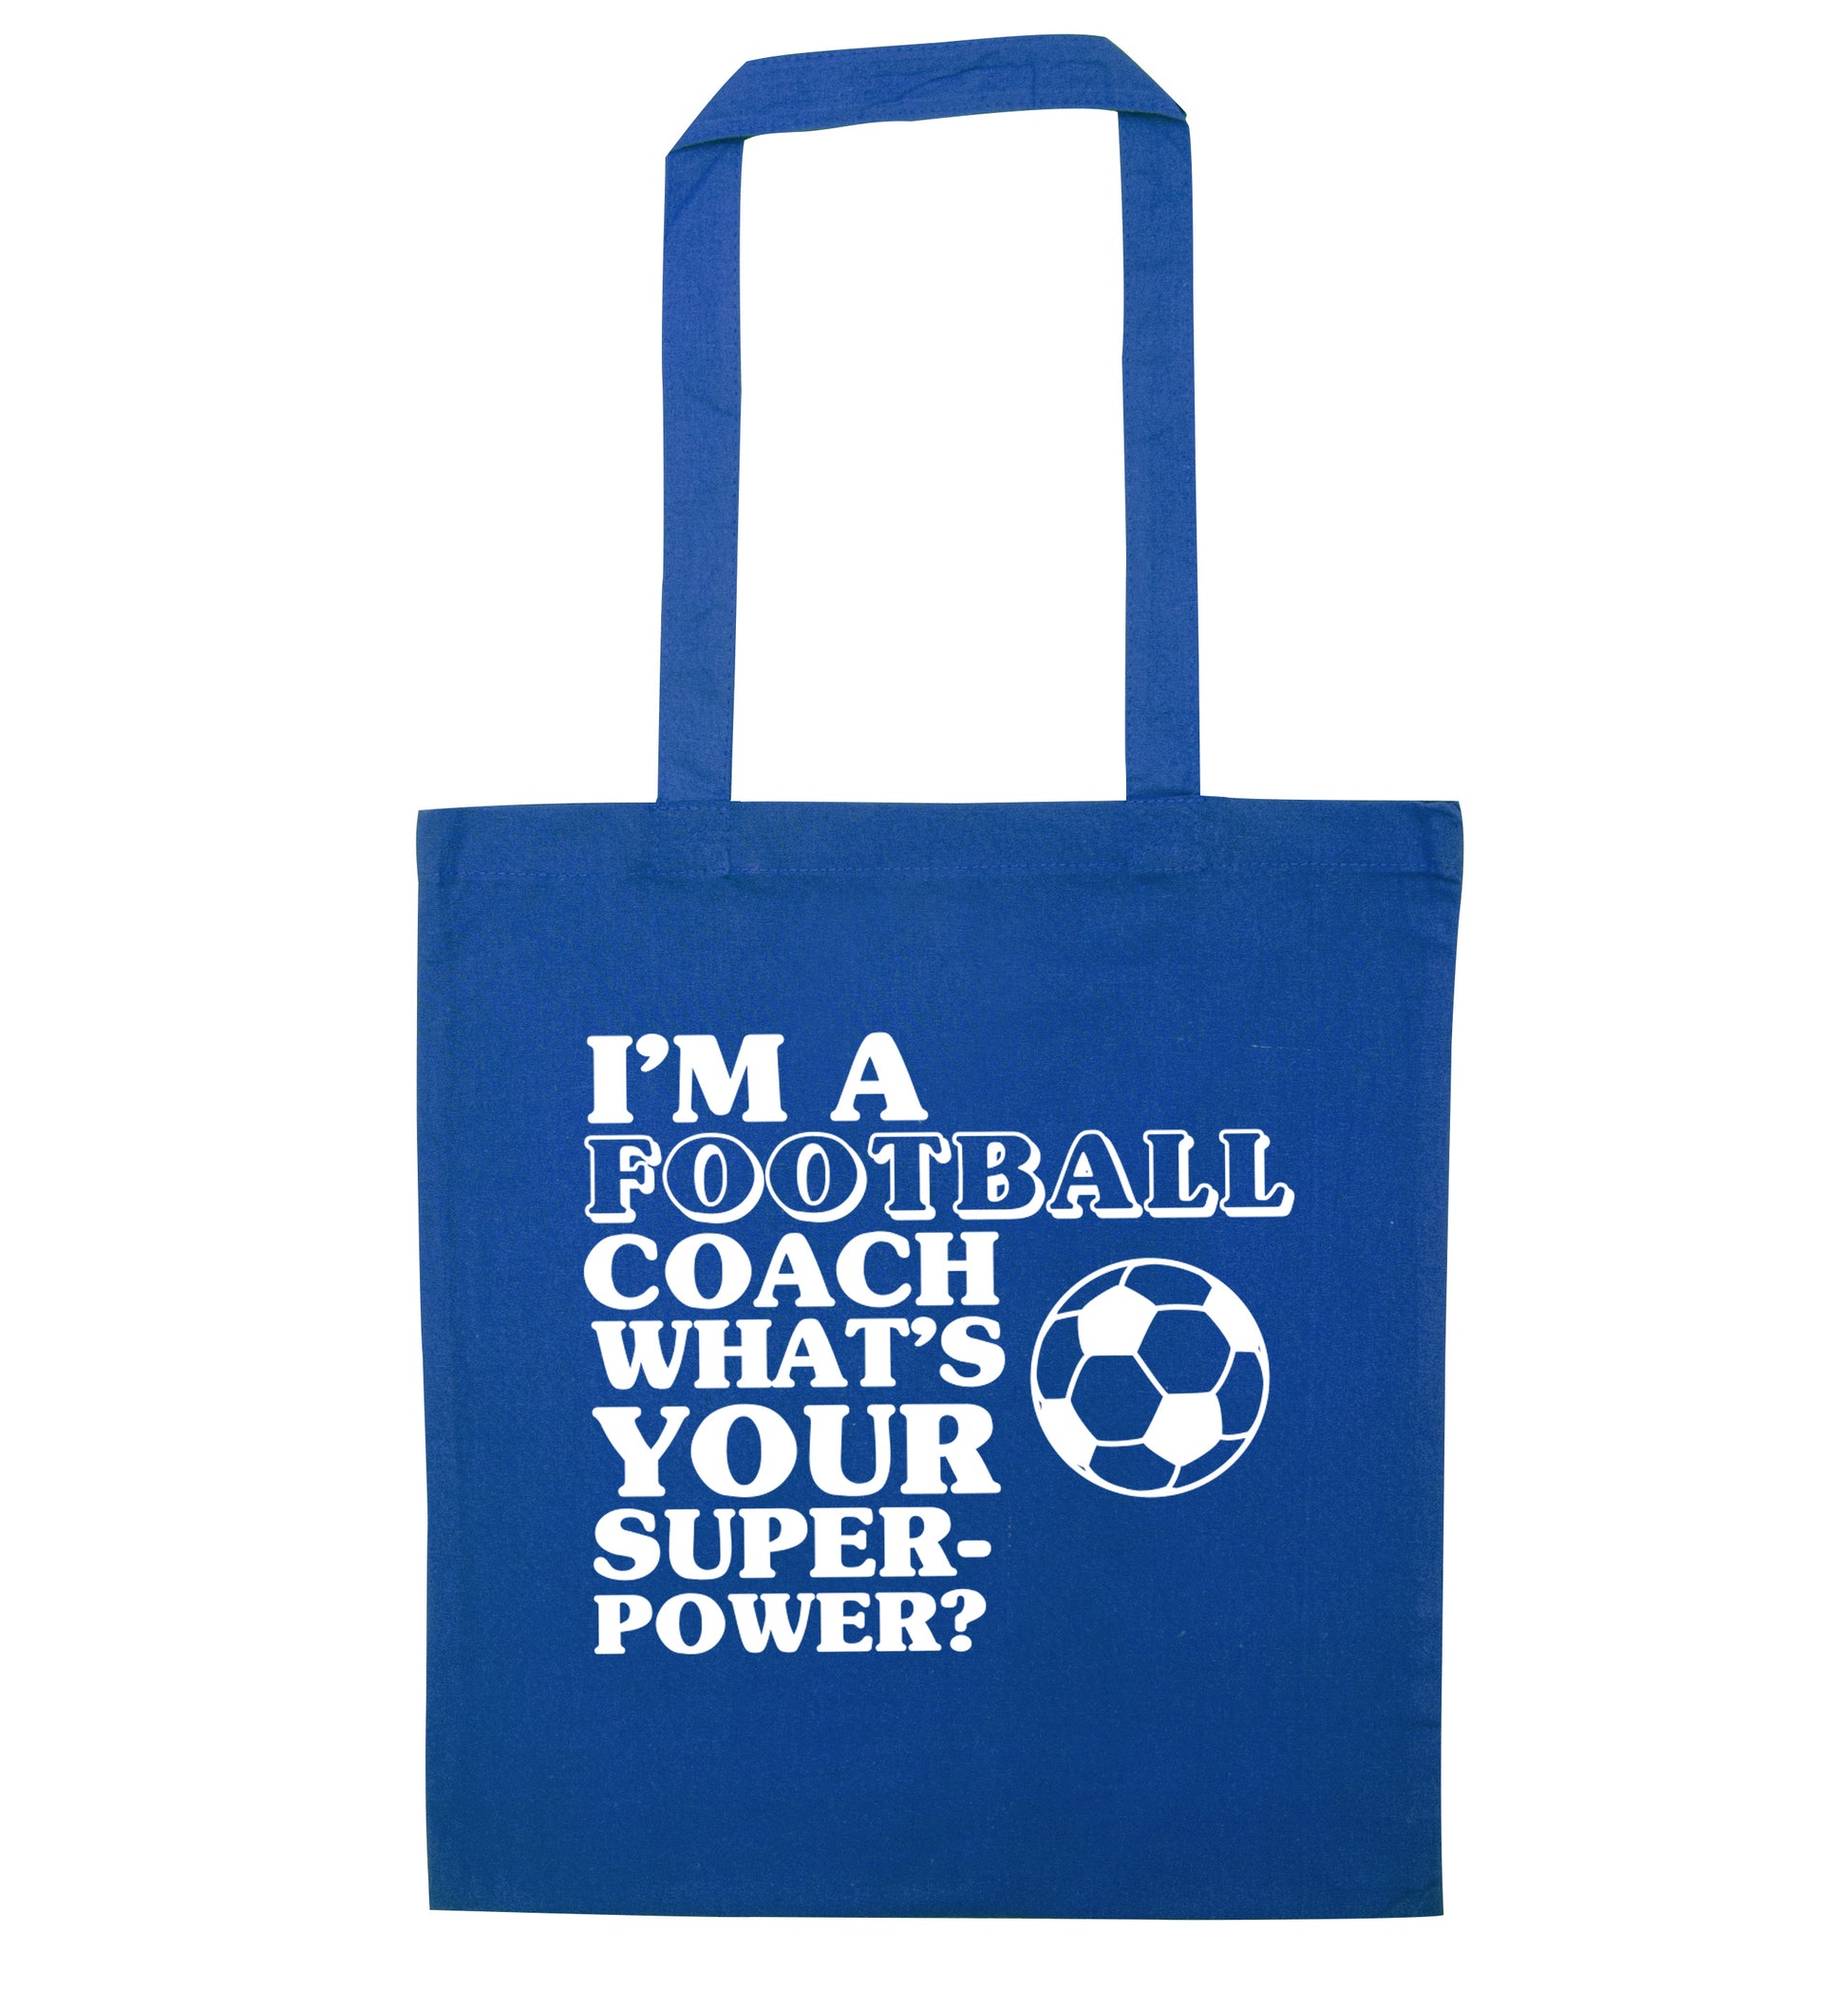 I'm a football coach what's your superpower? blue tote bag